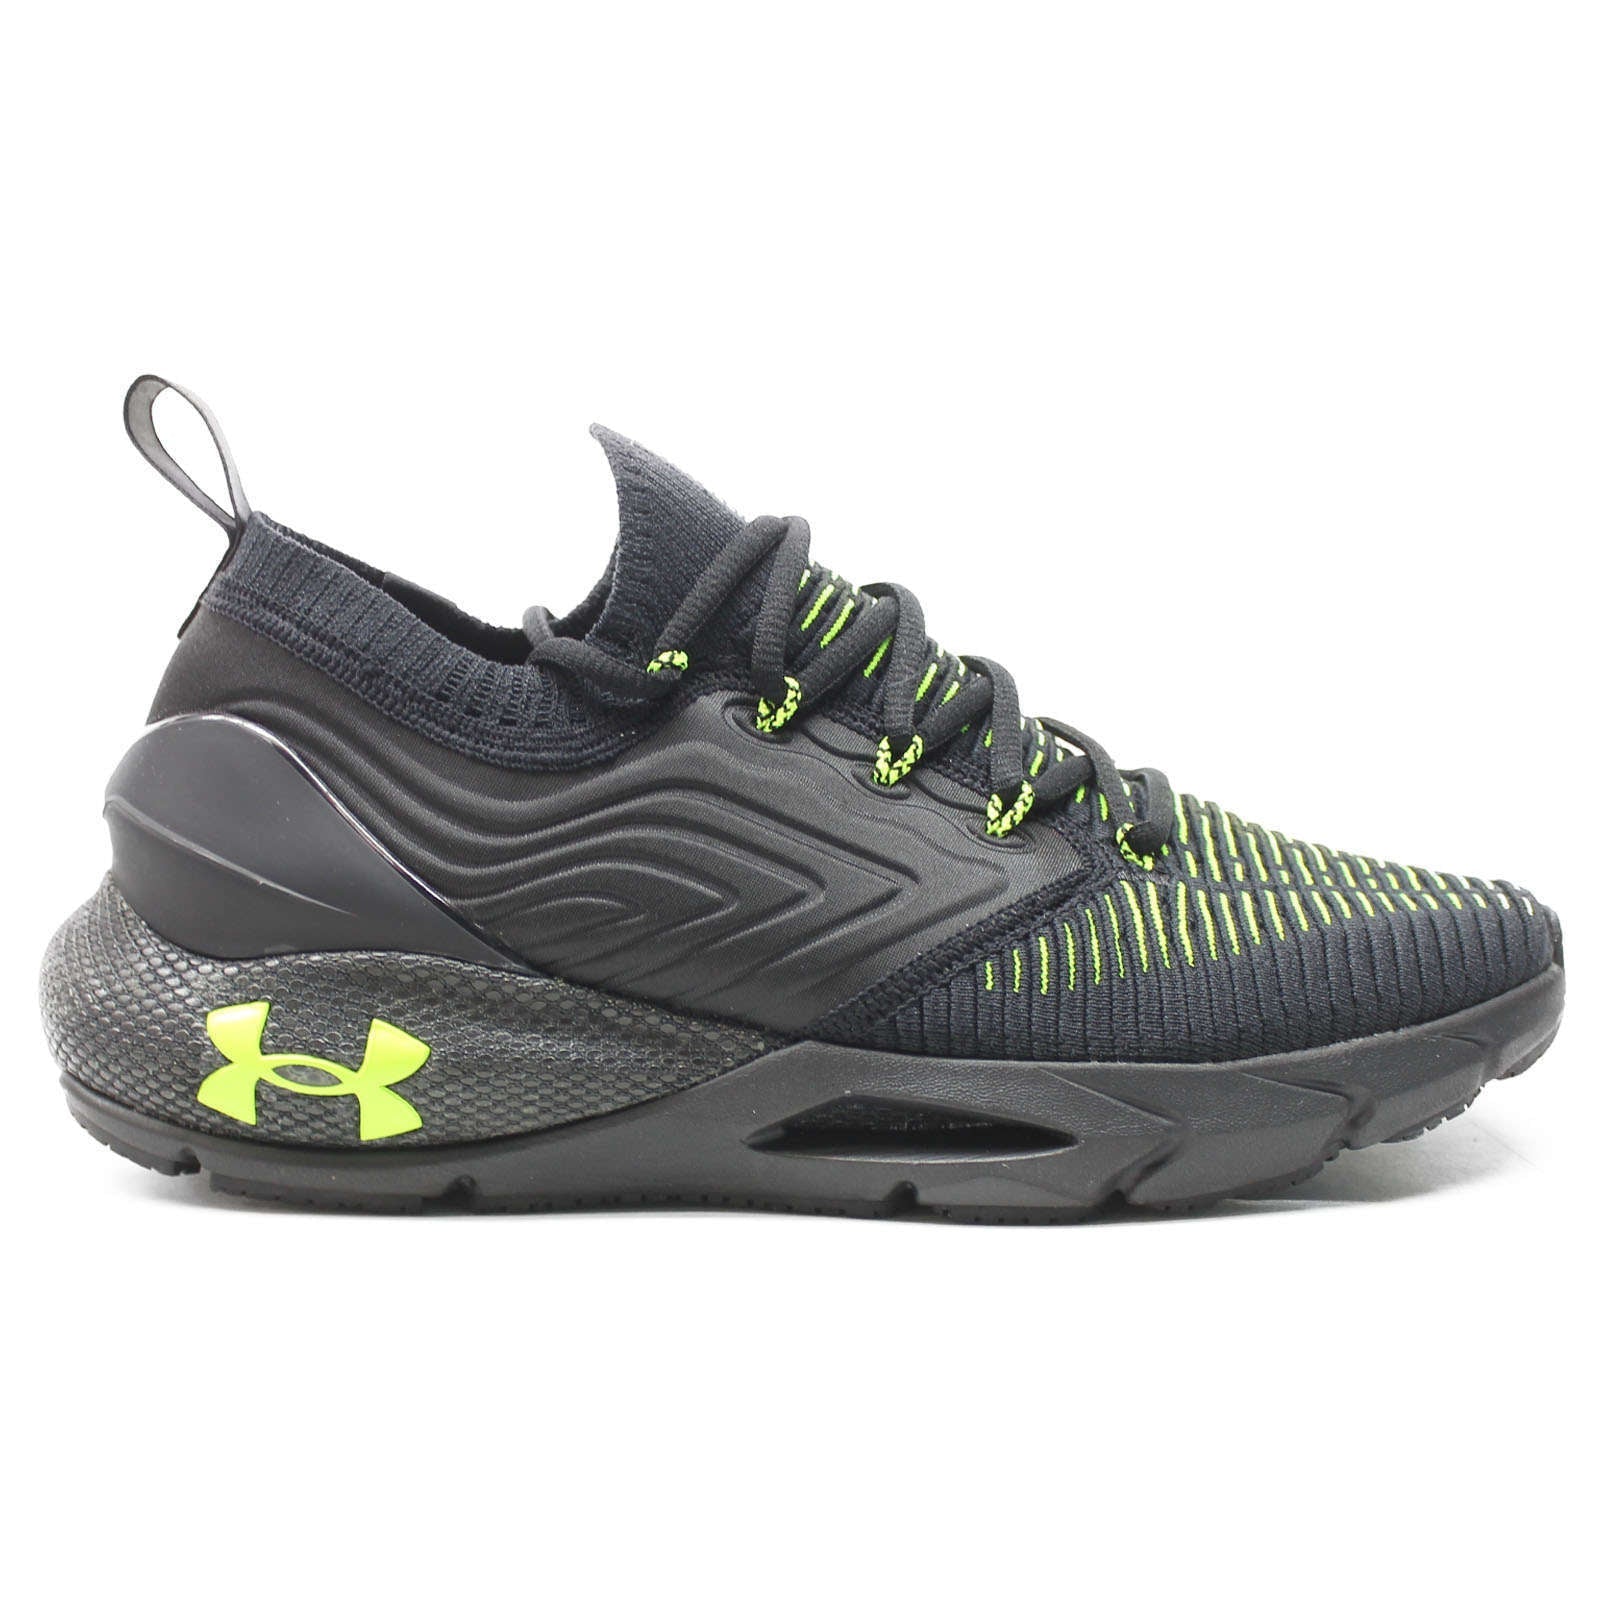 Under Armour HOVR Phantom 2 INKNT Synthetic Textile Men's Low-Top Sneakers#color_black yellow